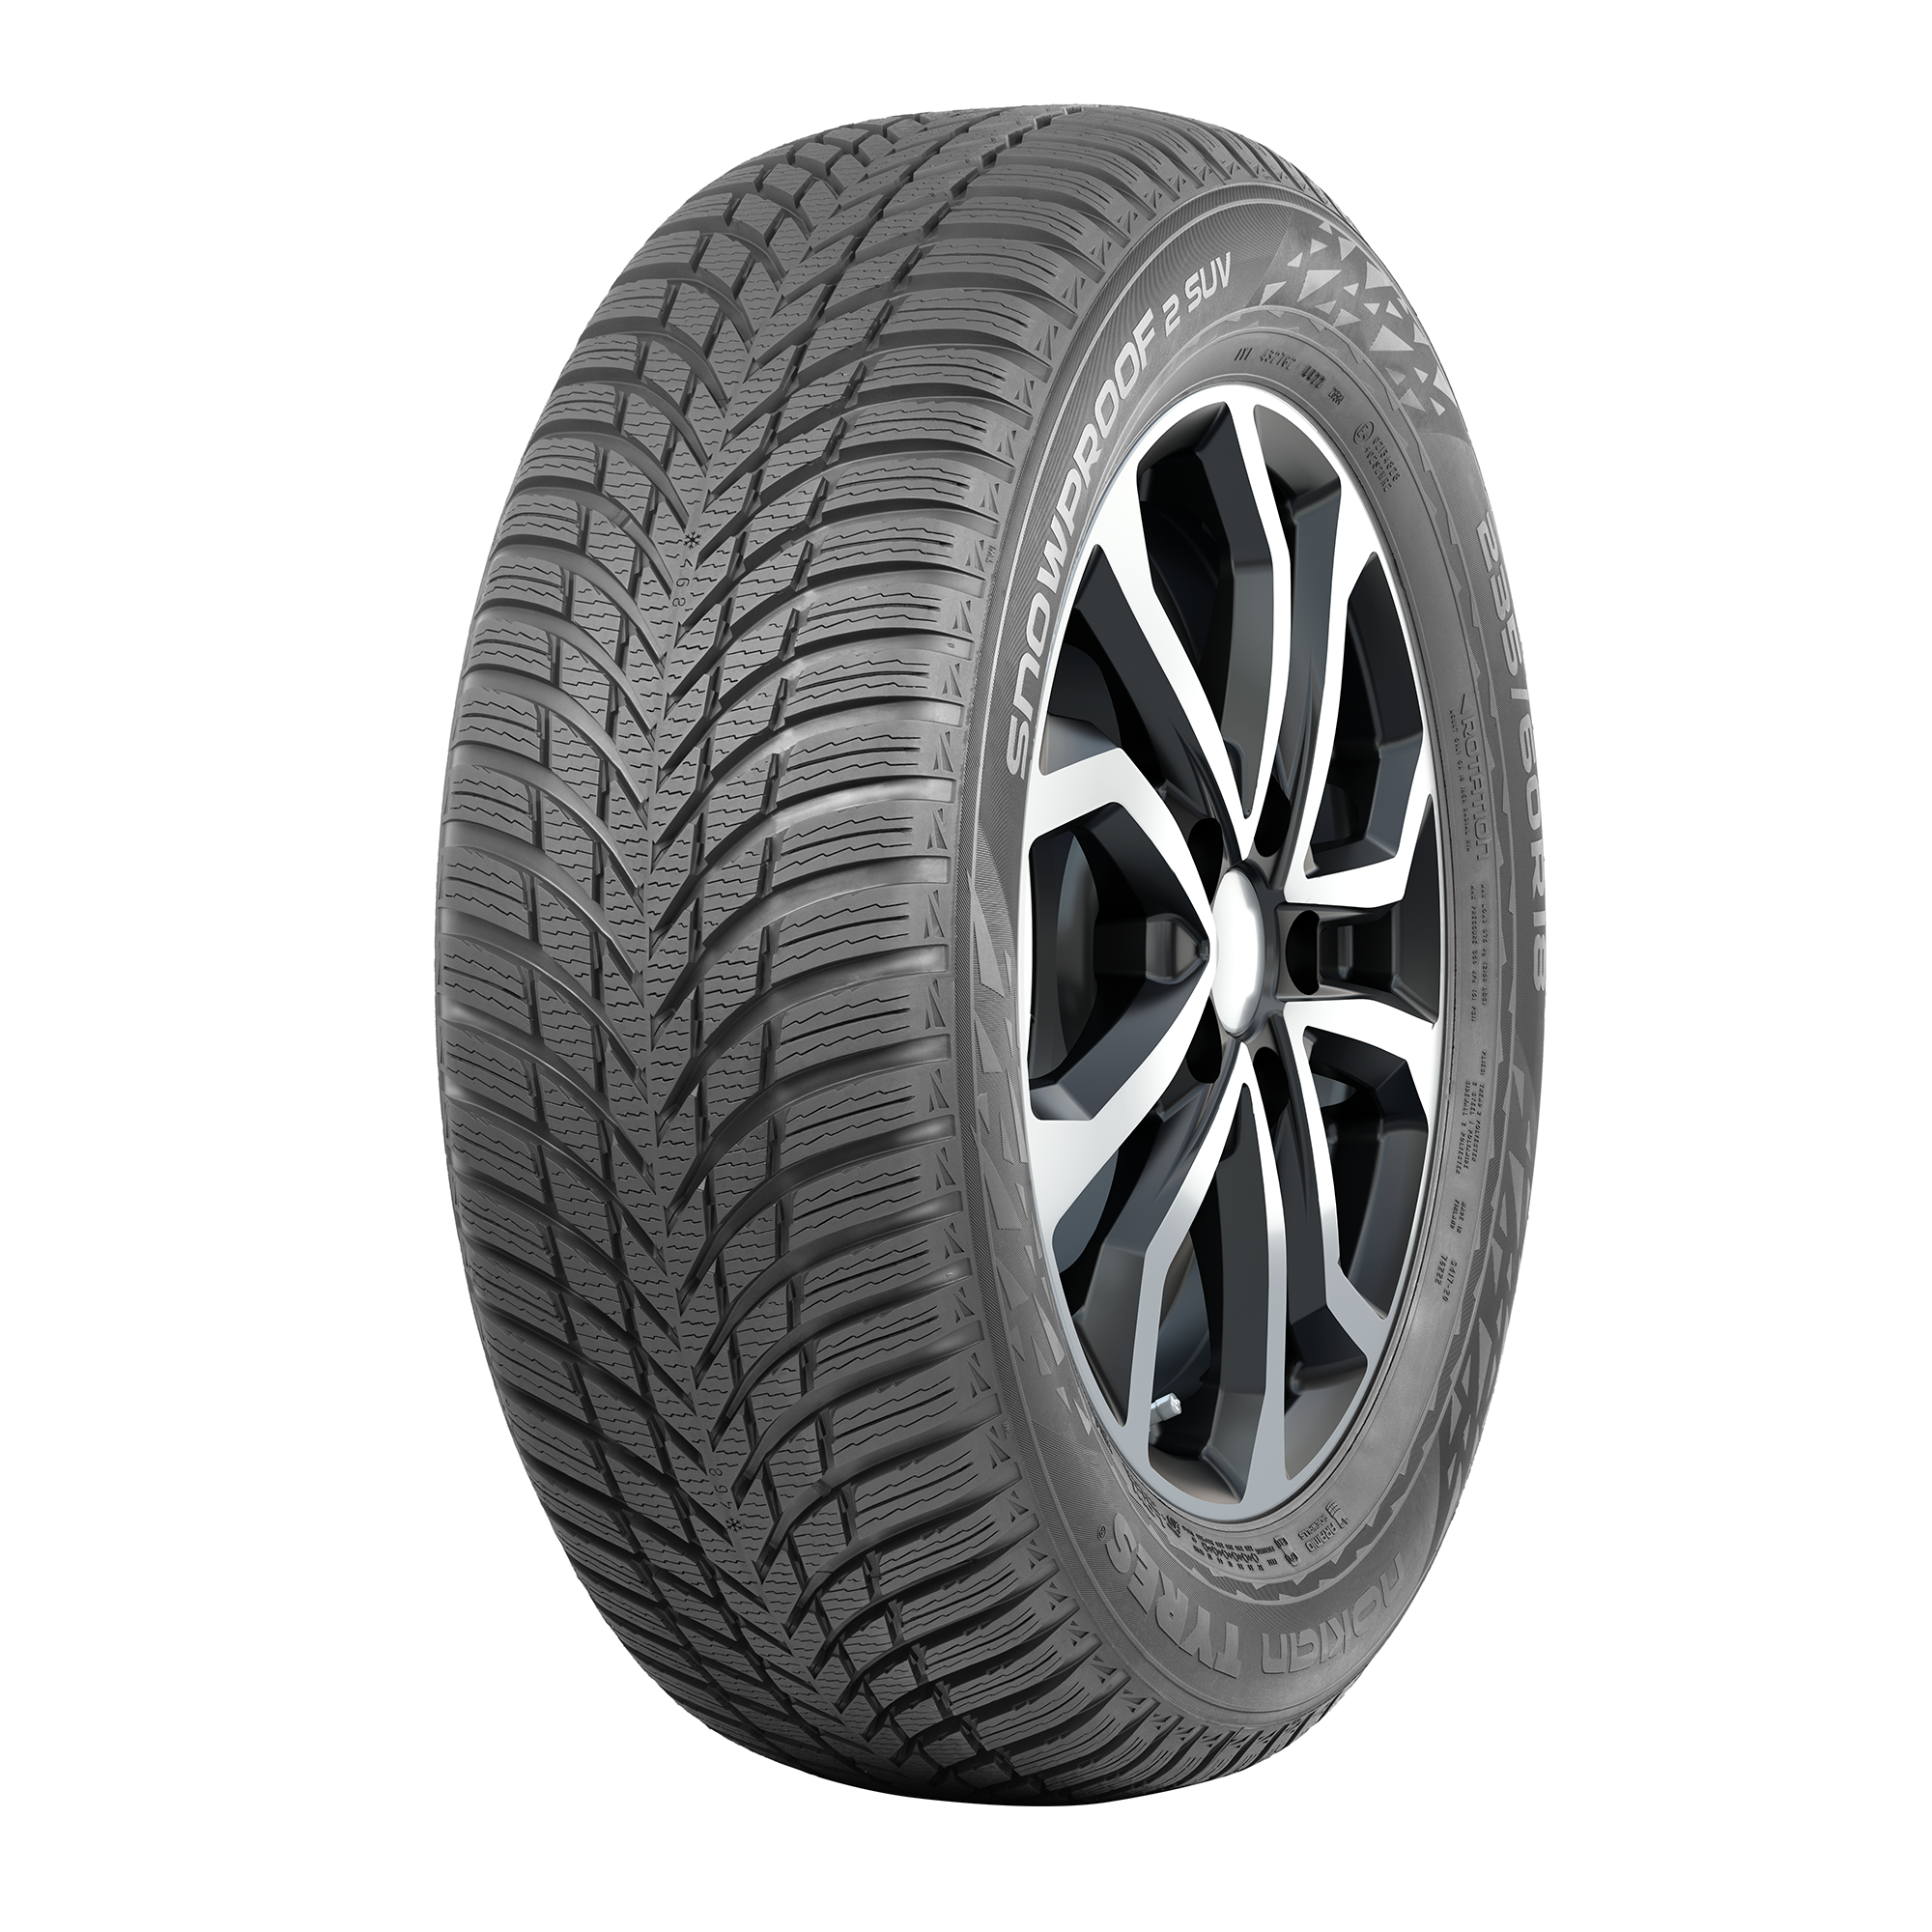 Nokian Tyres Snowproof 2 SUV 215/65 R16 98H